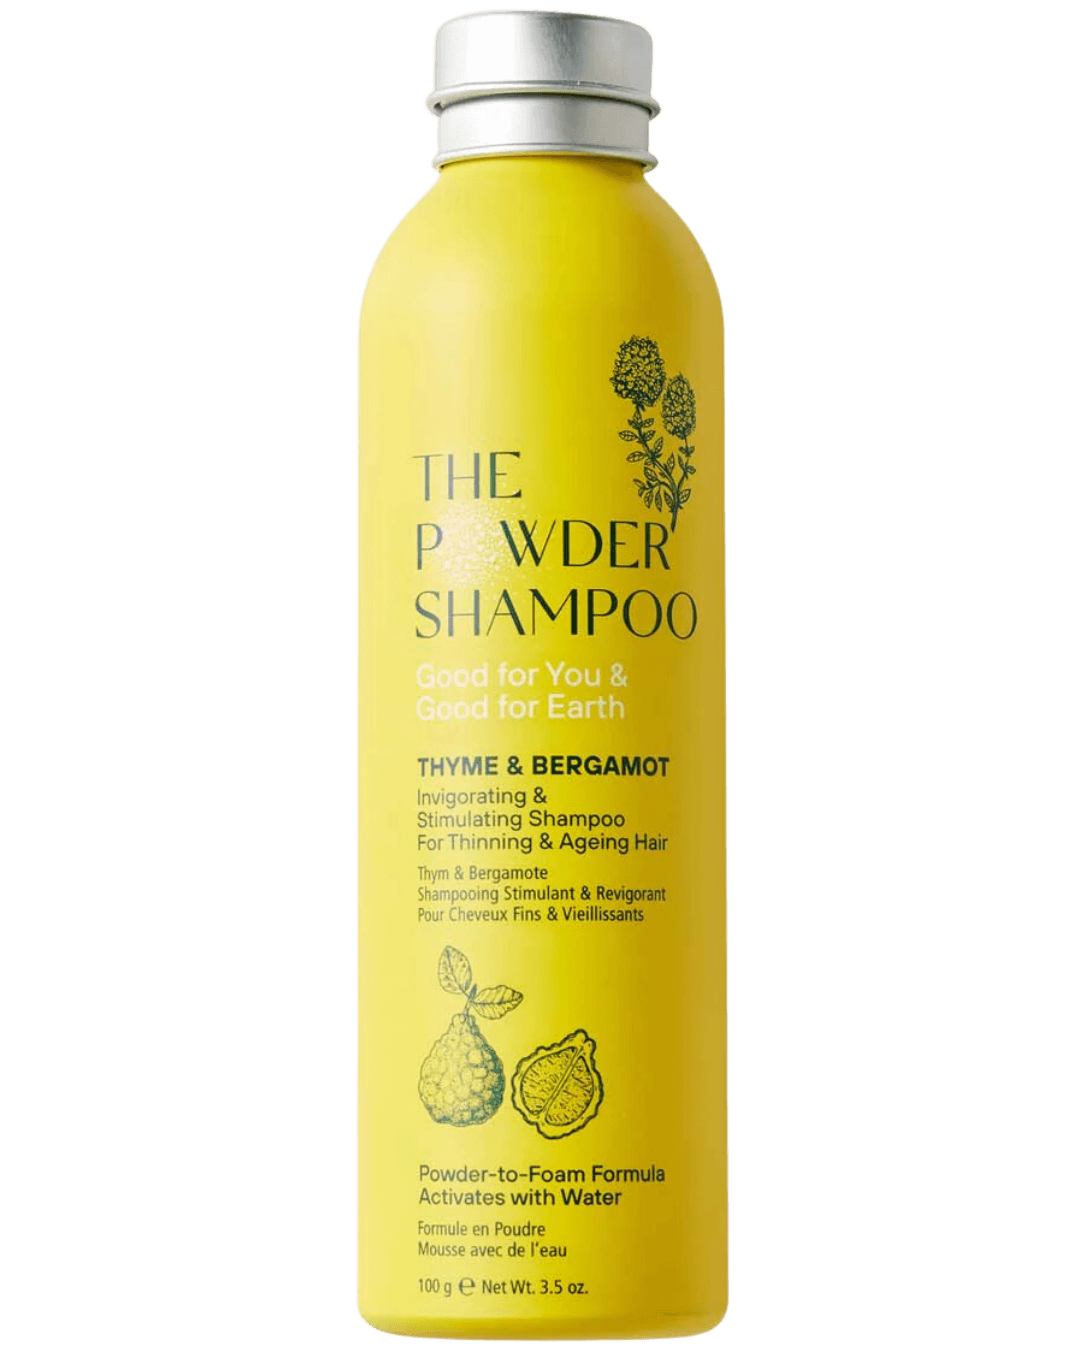 Daily Vanity Beauty Awards 2024 Best  The Powder Shampoo Invigorating &#038; Stimulating Powder Shampoo For Thinning &#038; Aging Hair Voted By Beauty Experts